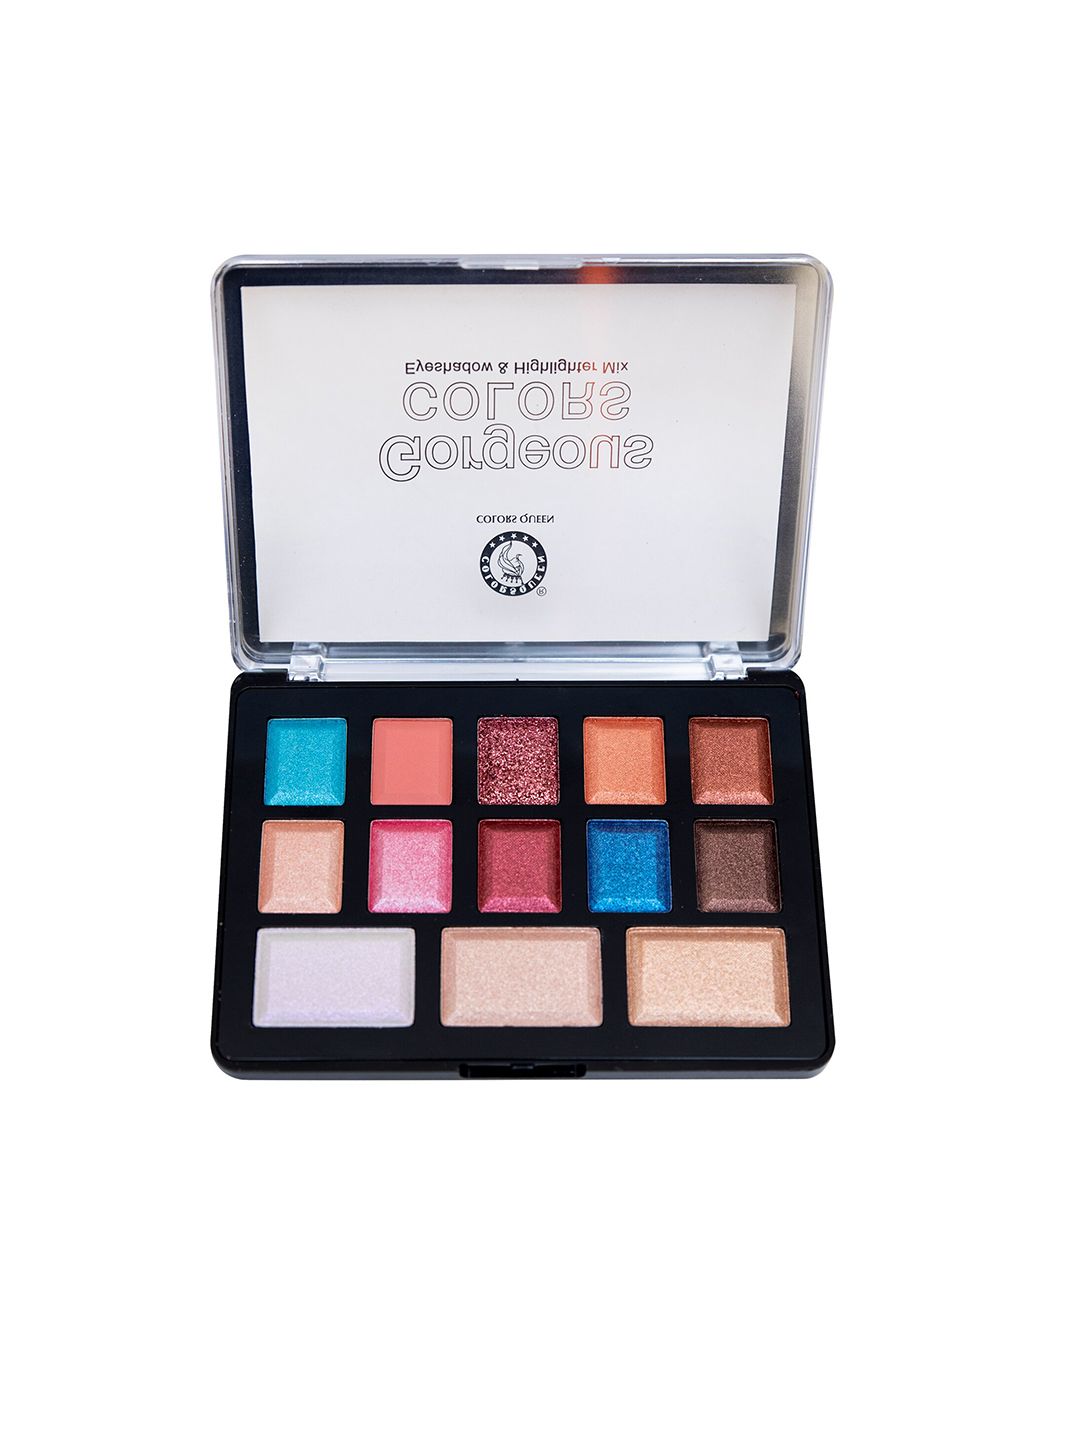 Colors Queen Gorgeous Eyeshadow Palette - 24 g Price in India